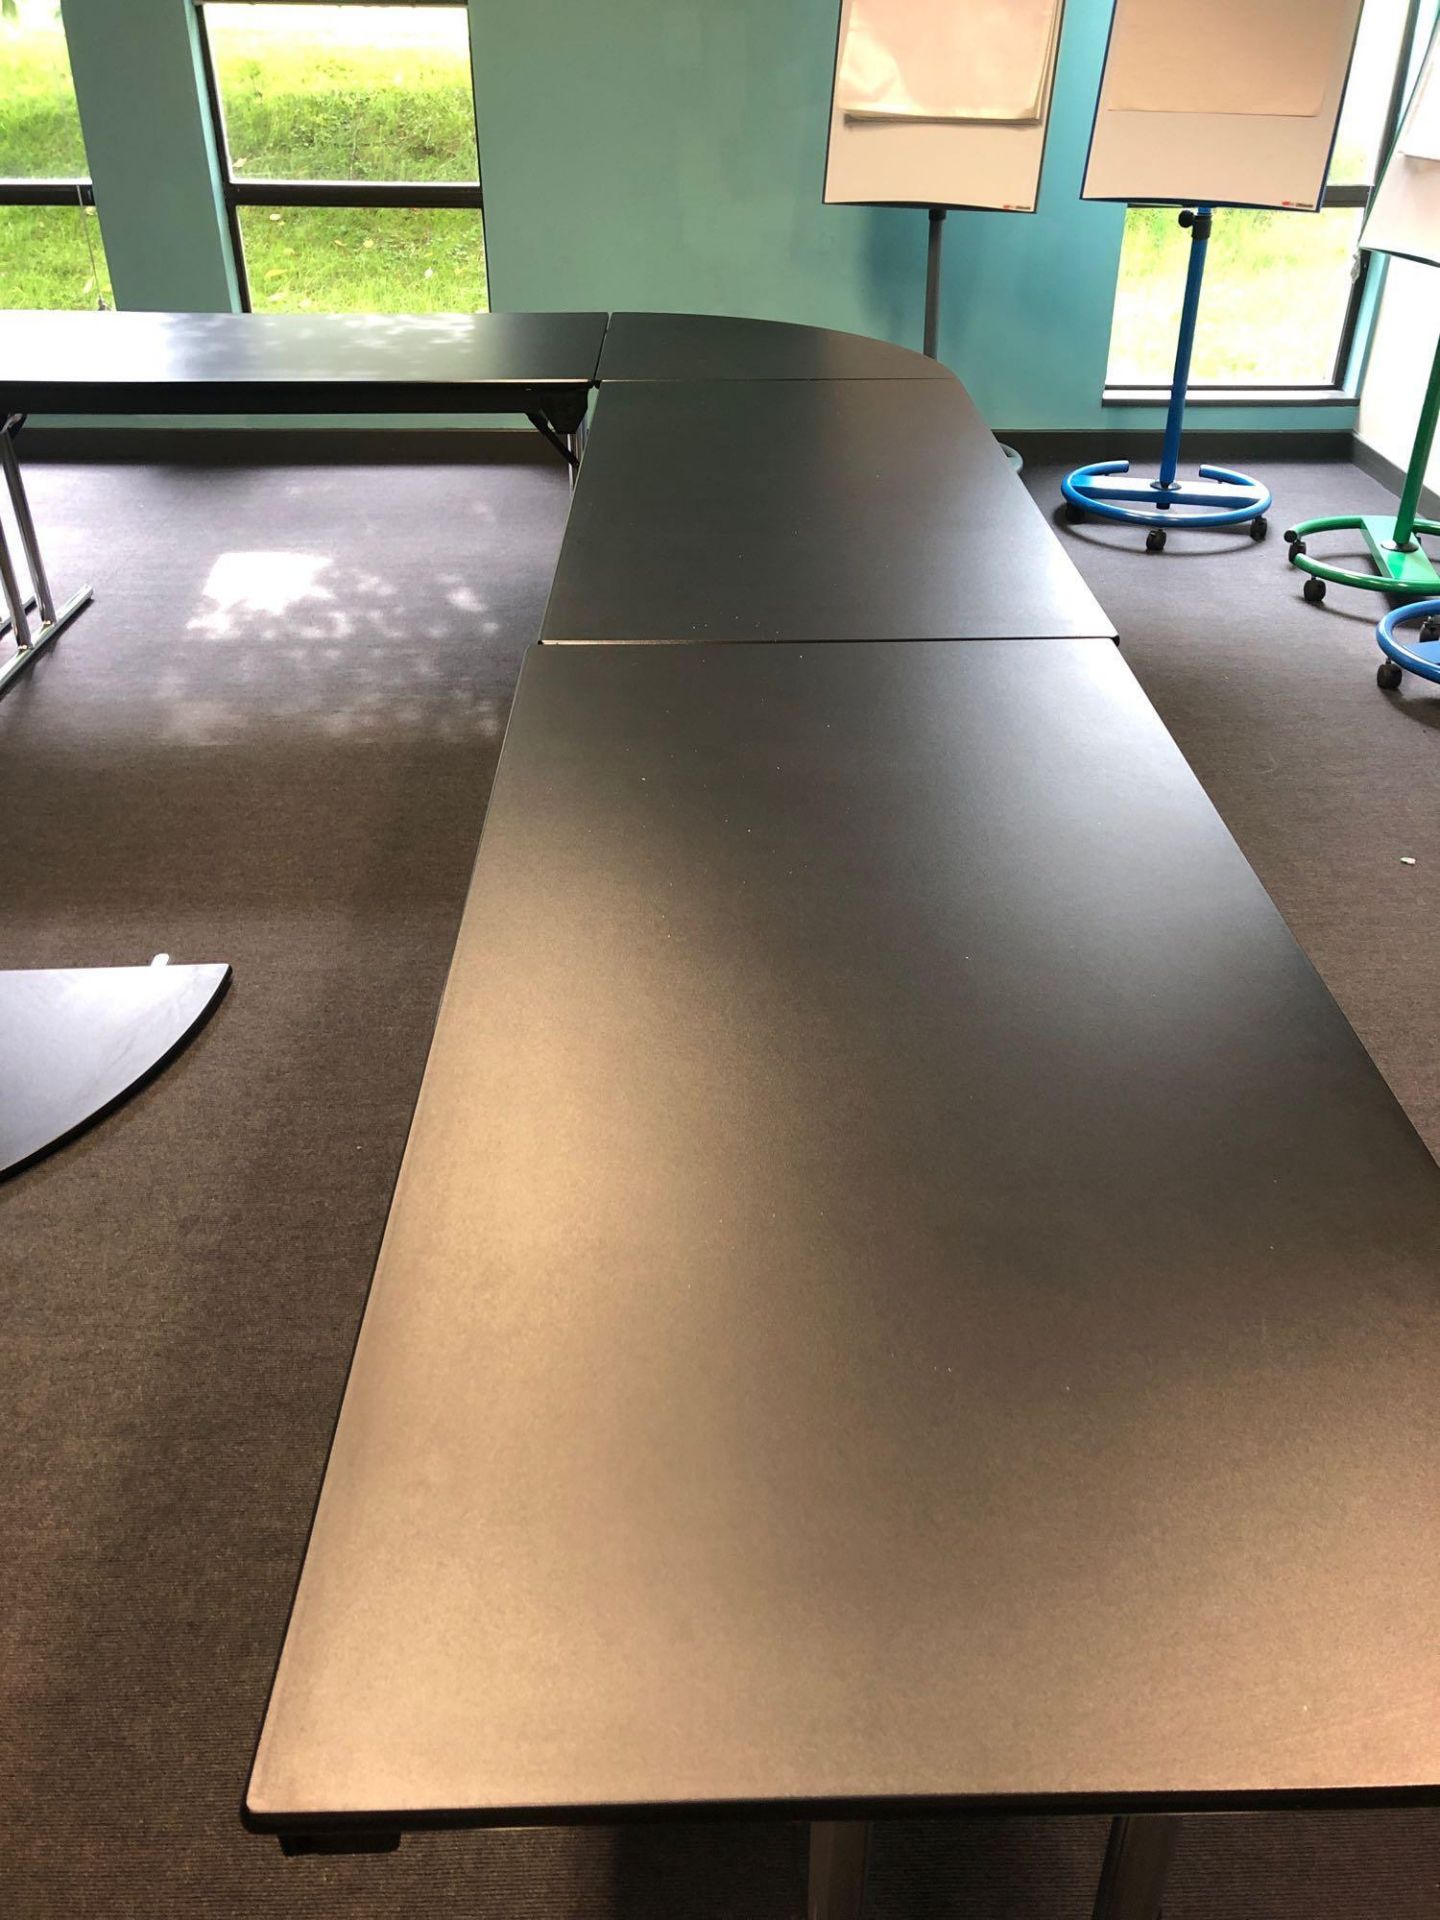 6x Burgess Furnitures Black And Chrome Conference Tables 1500 x 750 Mm